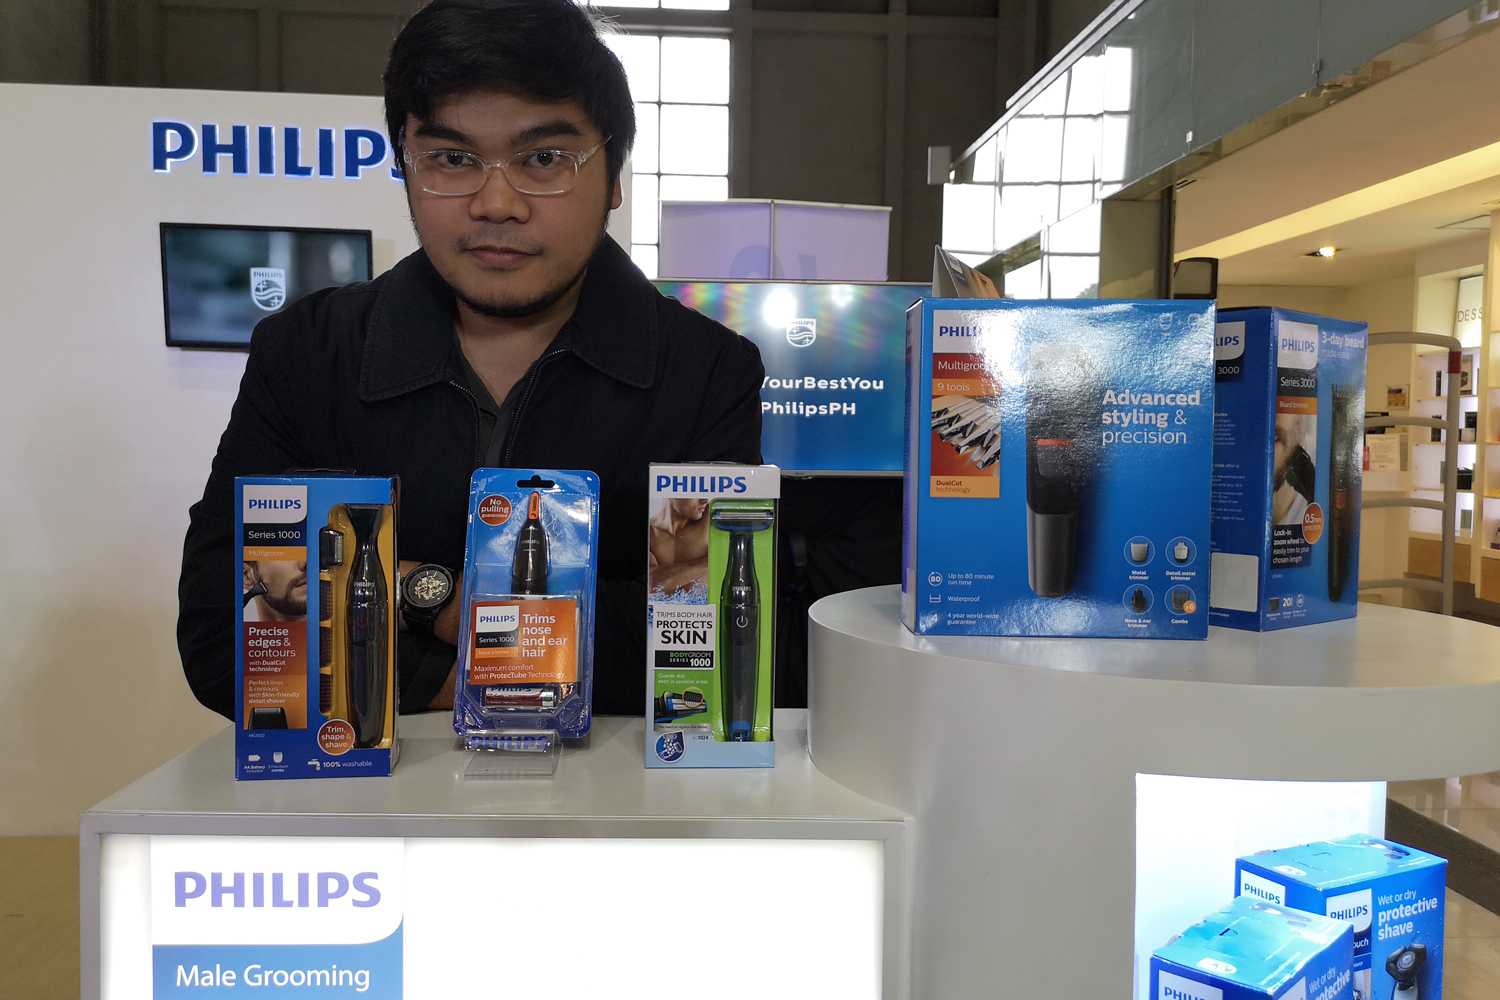 Philips Multigroomers Enables the Modern Gentleman to “Be Your Best You”